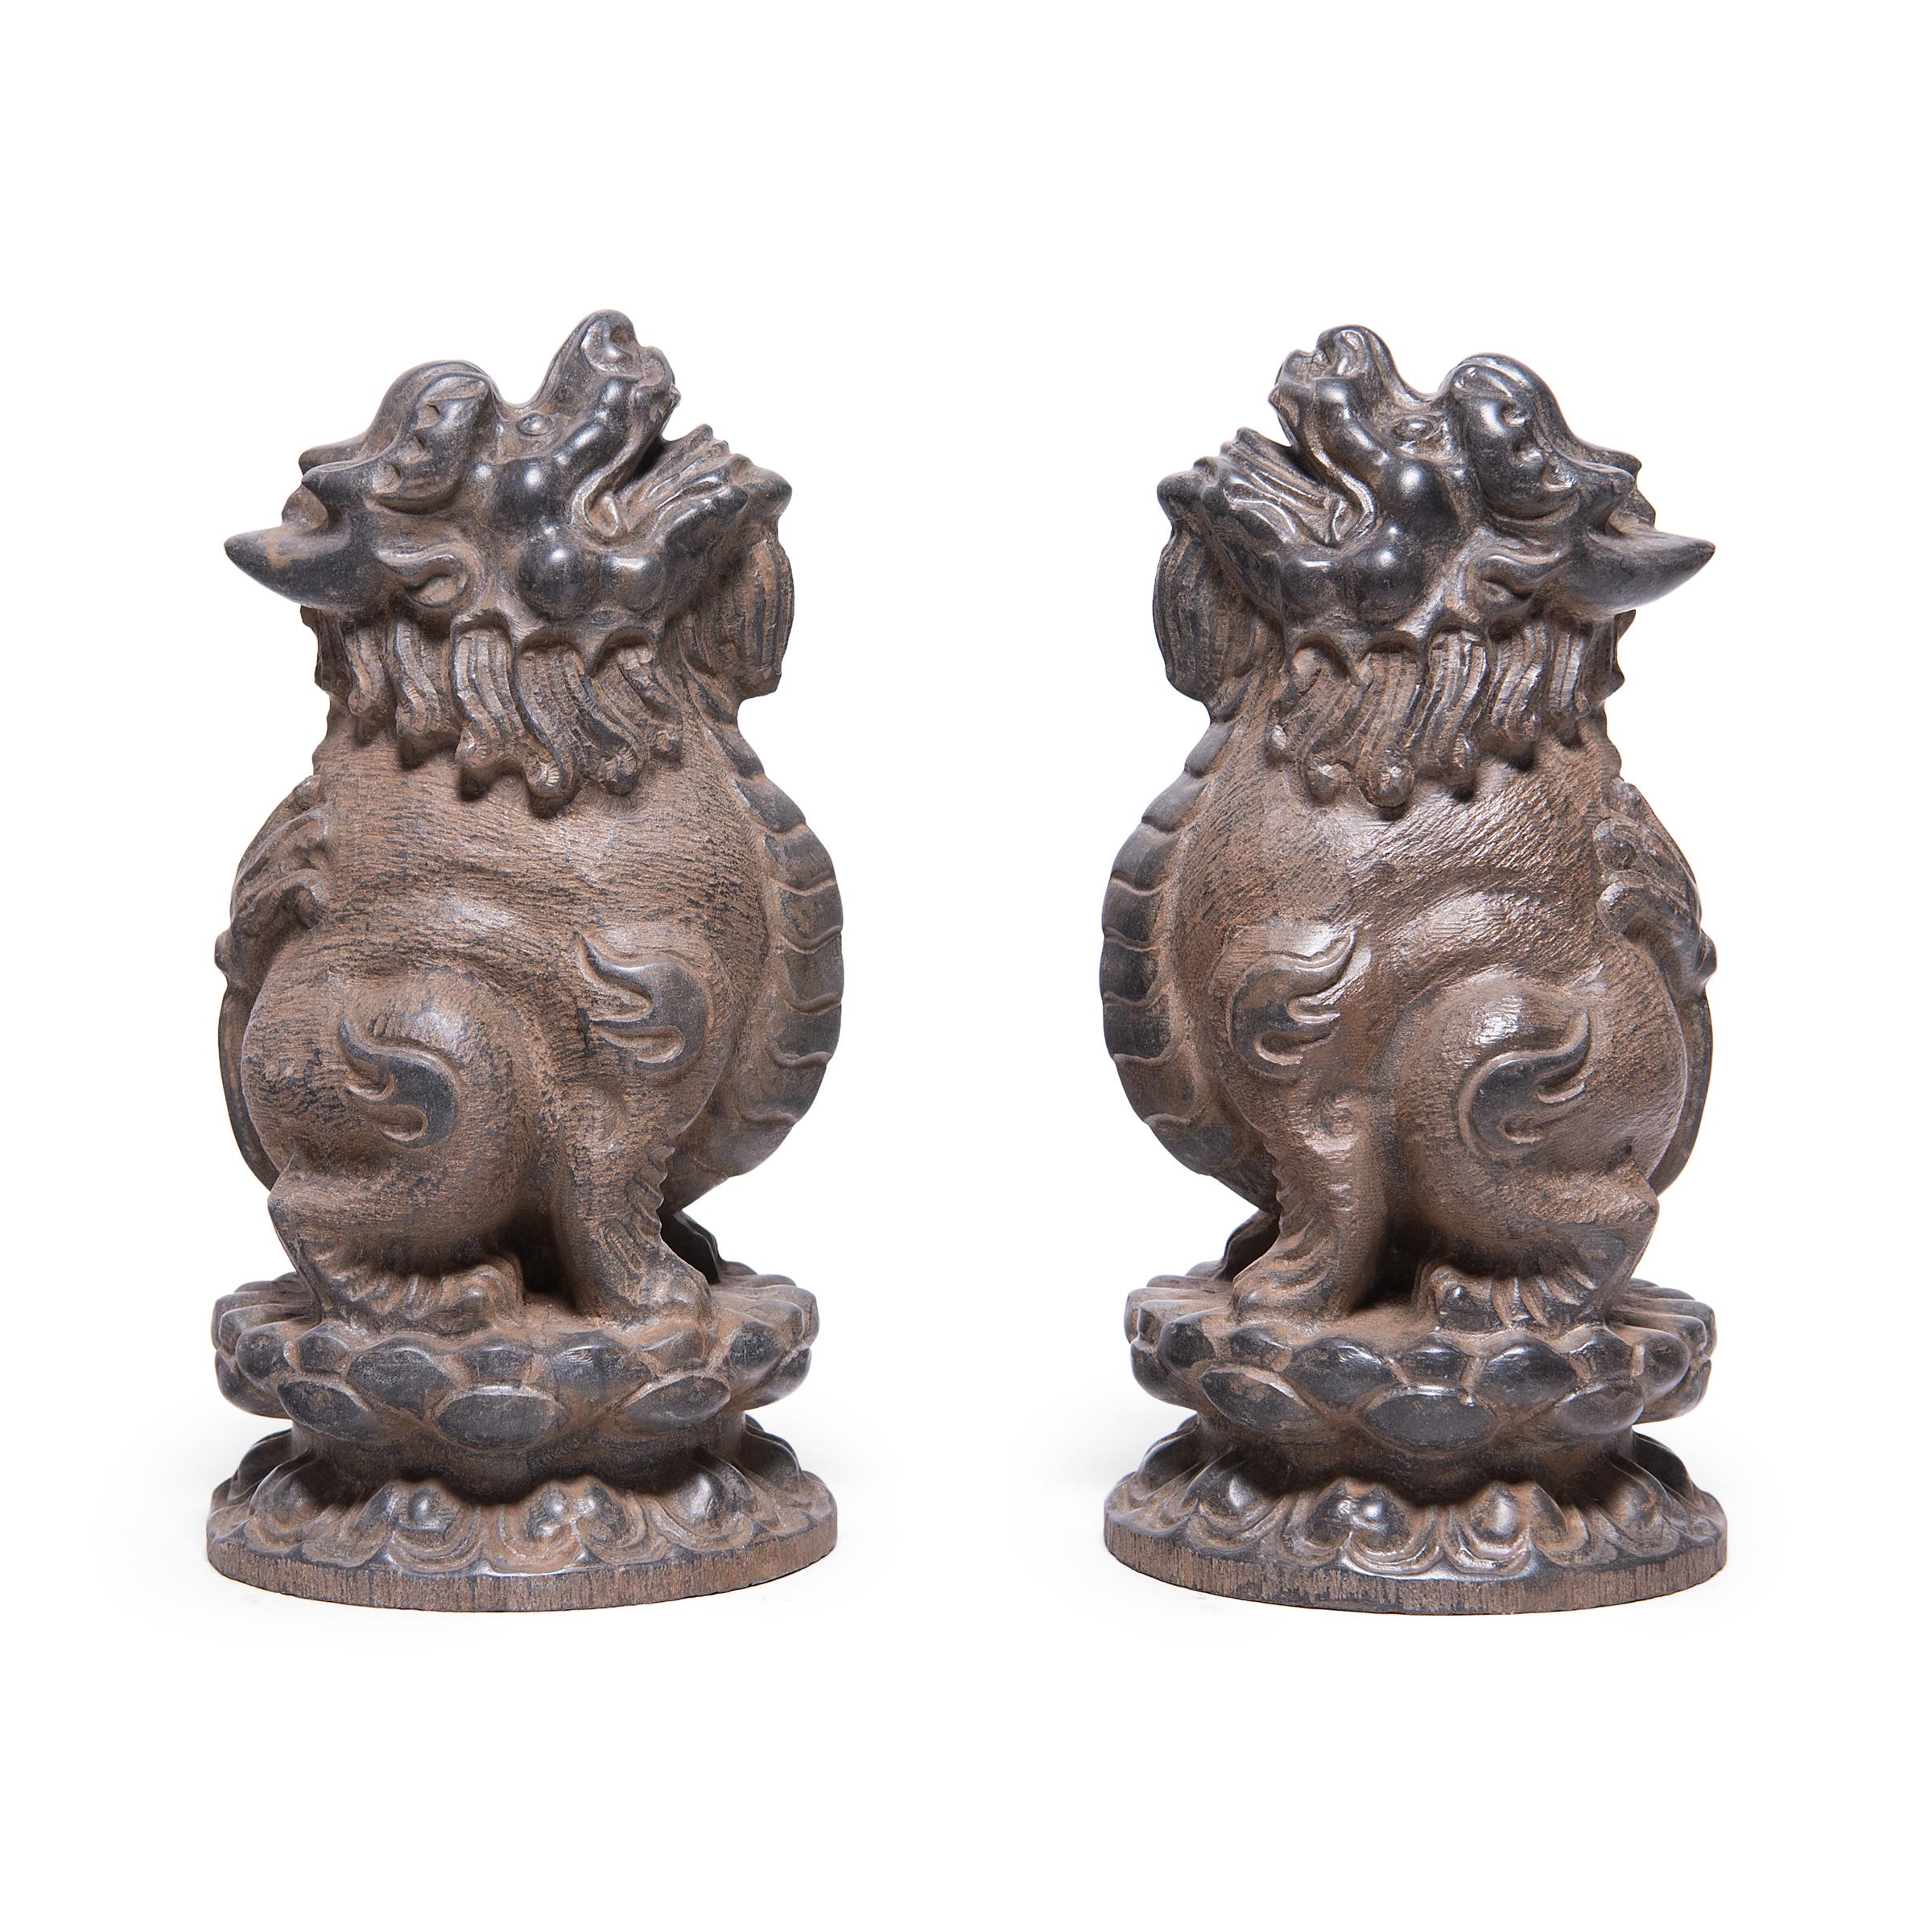 Hand-carved from solid limestone, these mythical figures are qilin, hybrid creatures from Chinese mythology thought to bring luck and happiness. Crouching upon lotus plinths, these qilin are sculpted with lion-like features, though with the head of